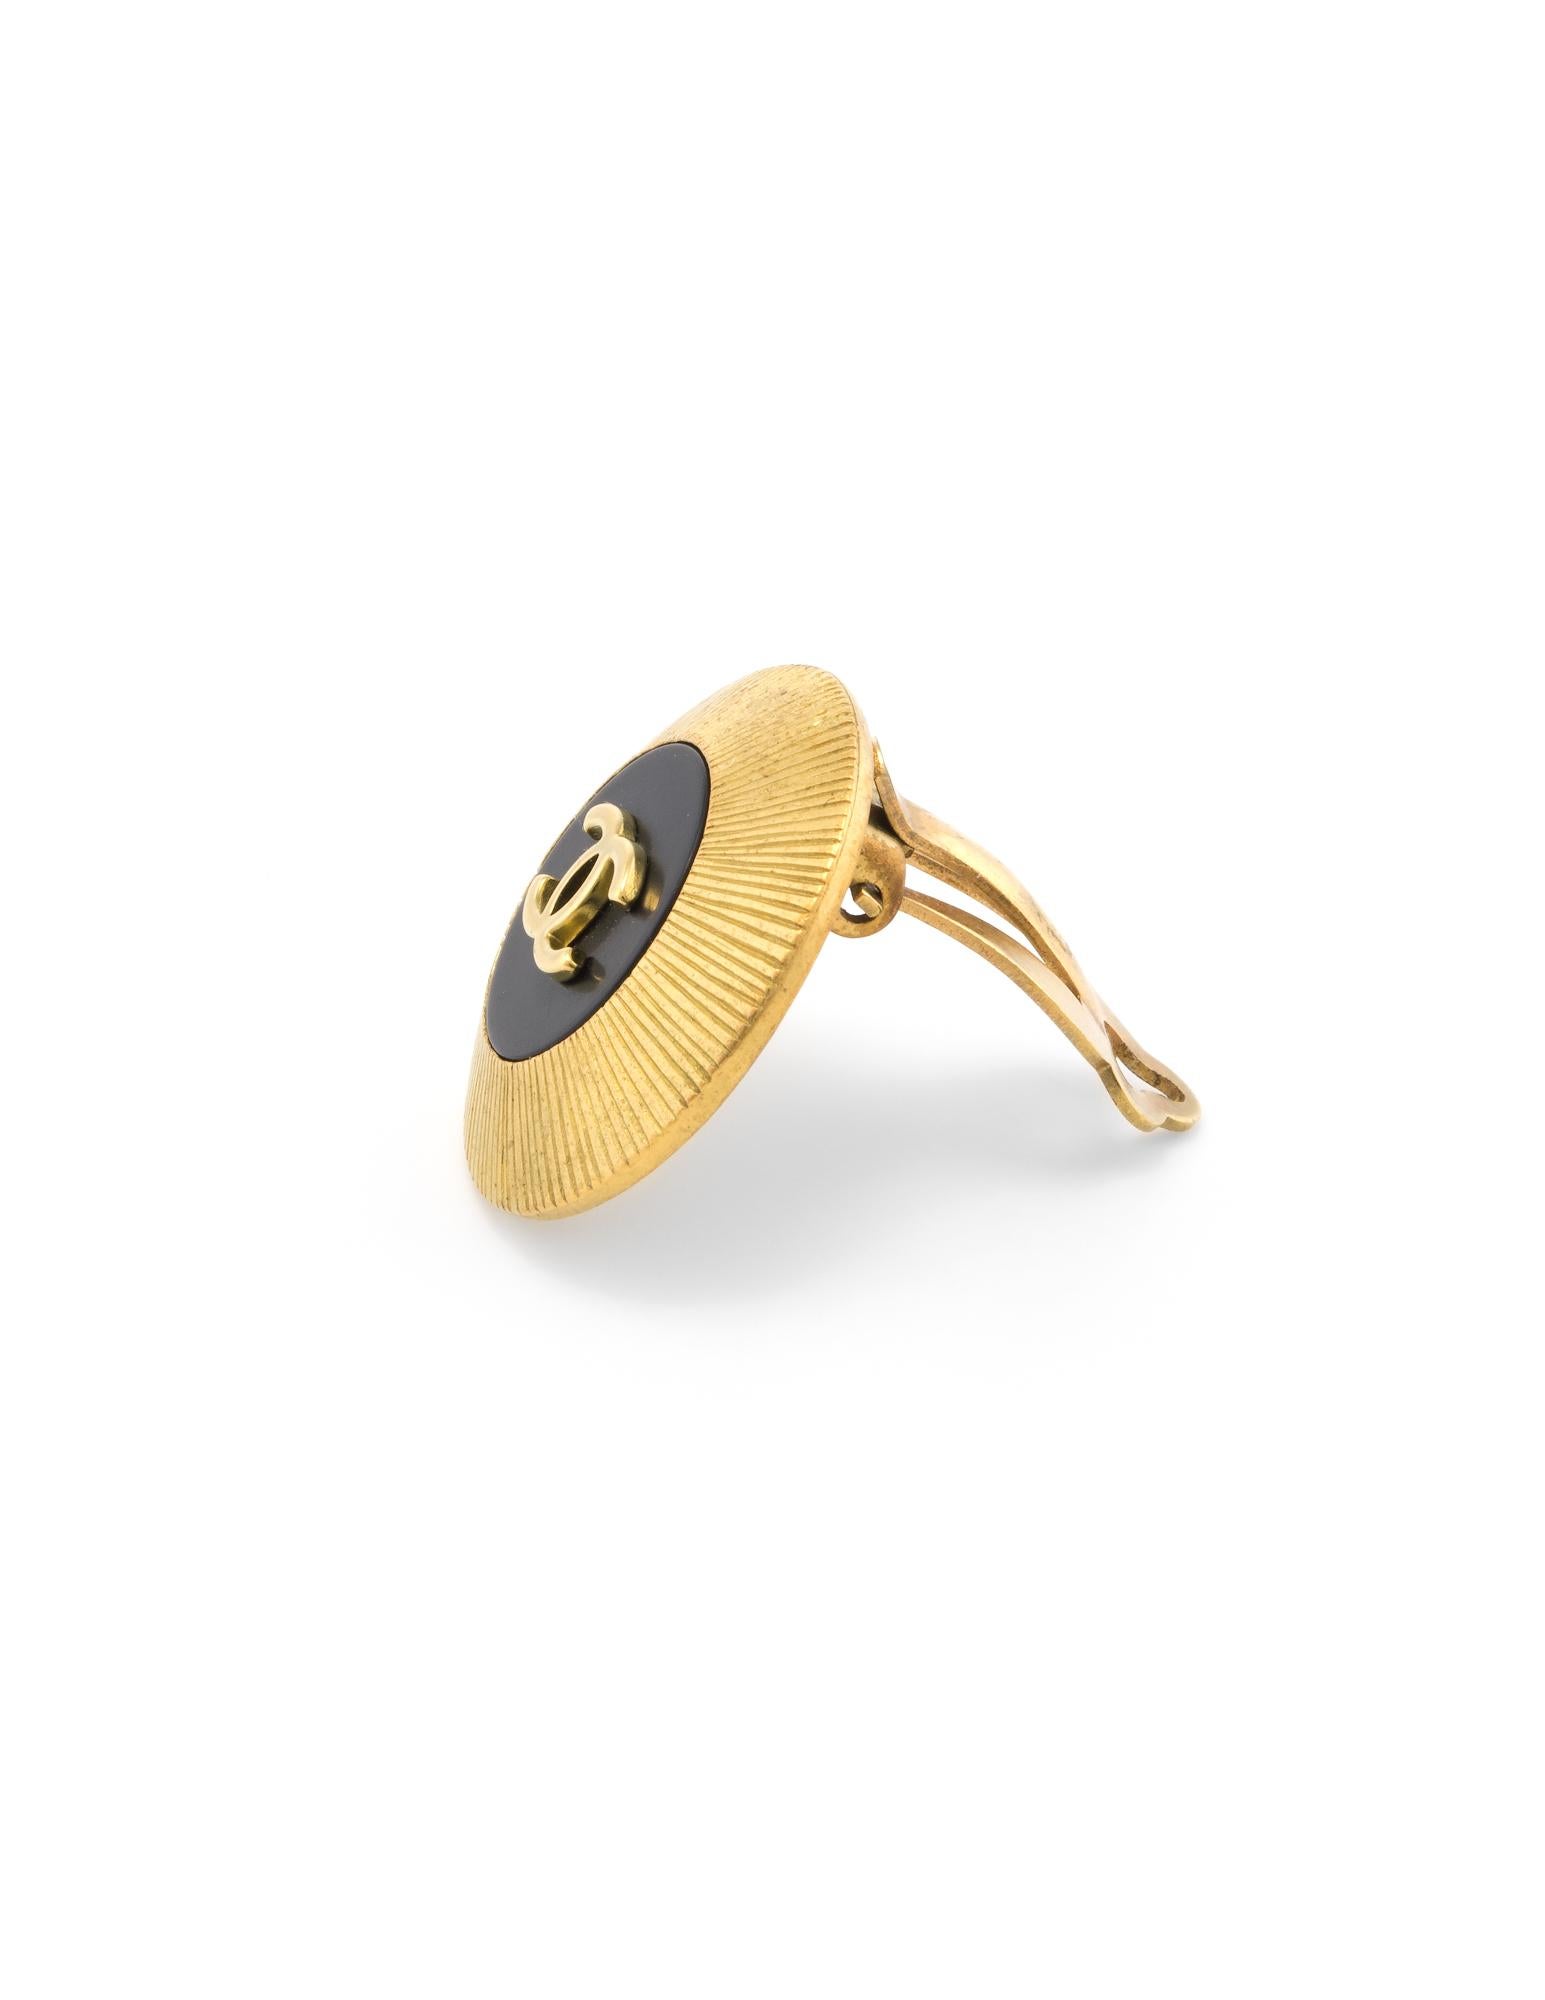 Vintage Chanel CC logo earrings crafted in yellow gold tone, circa 1995. 

The earrings feature a textured outer design with a black backdrop to the CC logo in the center. The earrings feature hinged clip backings for non-pierced or pierced